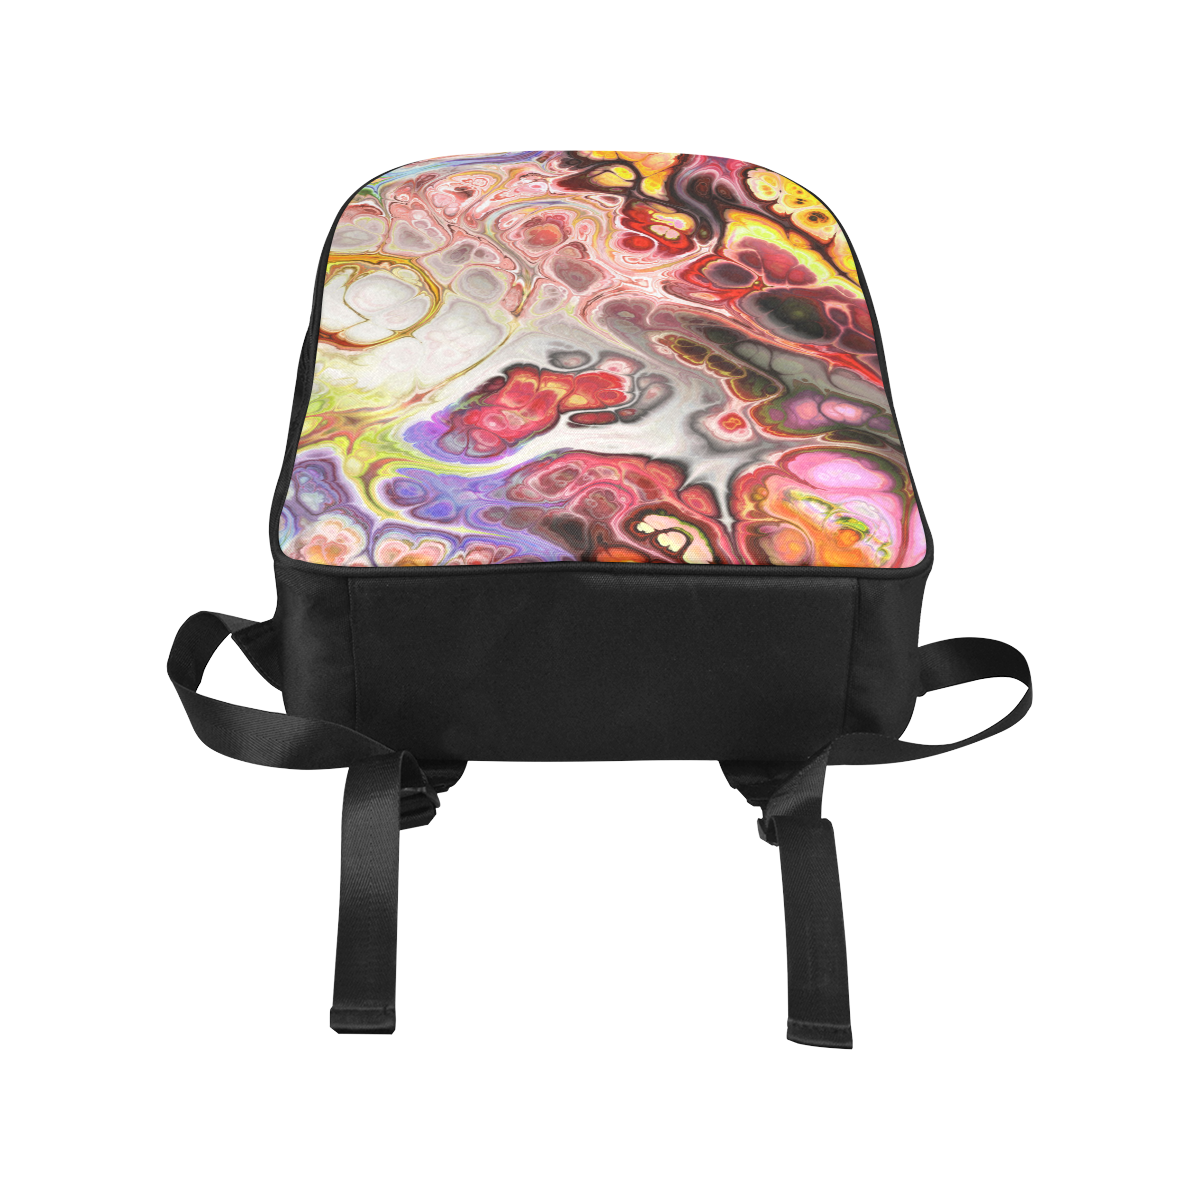 Colorful Marble Design Popular Fabric Backpack (Model 1683)